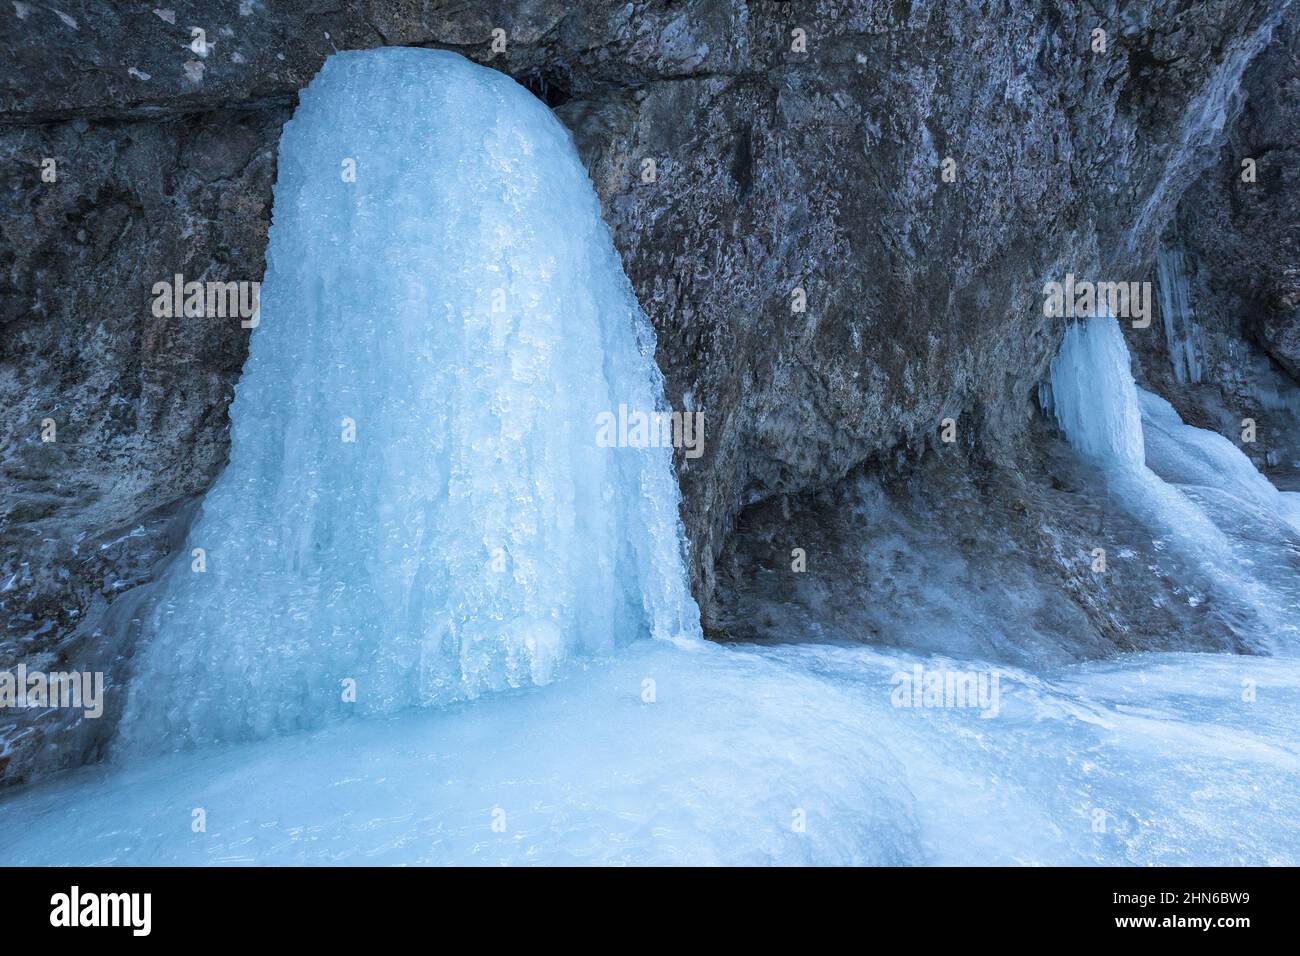 Detail of a winter landscape, icefall on a rock wall. Stock Photo